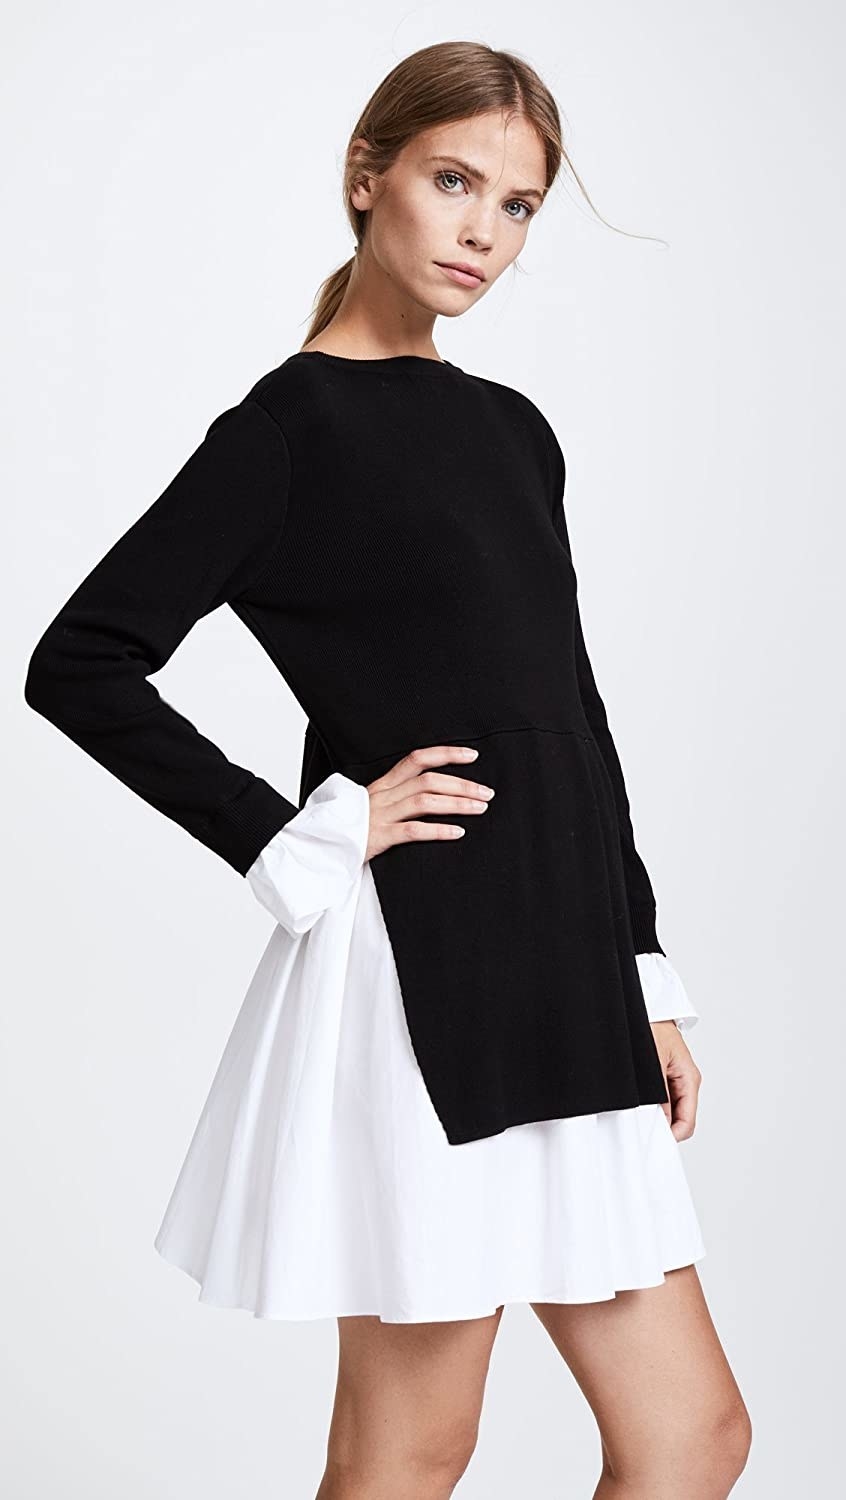 A model wearing the long-sleeved dress with a black knit top and white flared bottom and sleeves